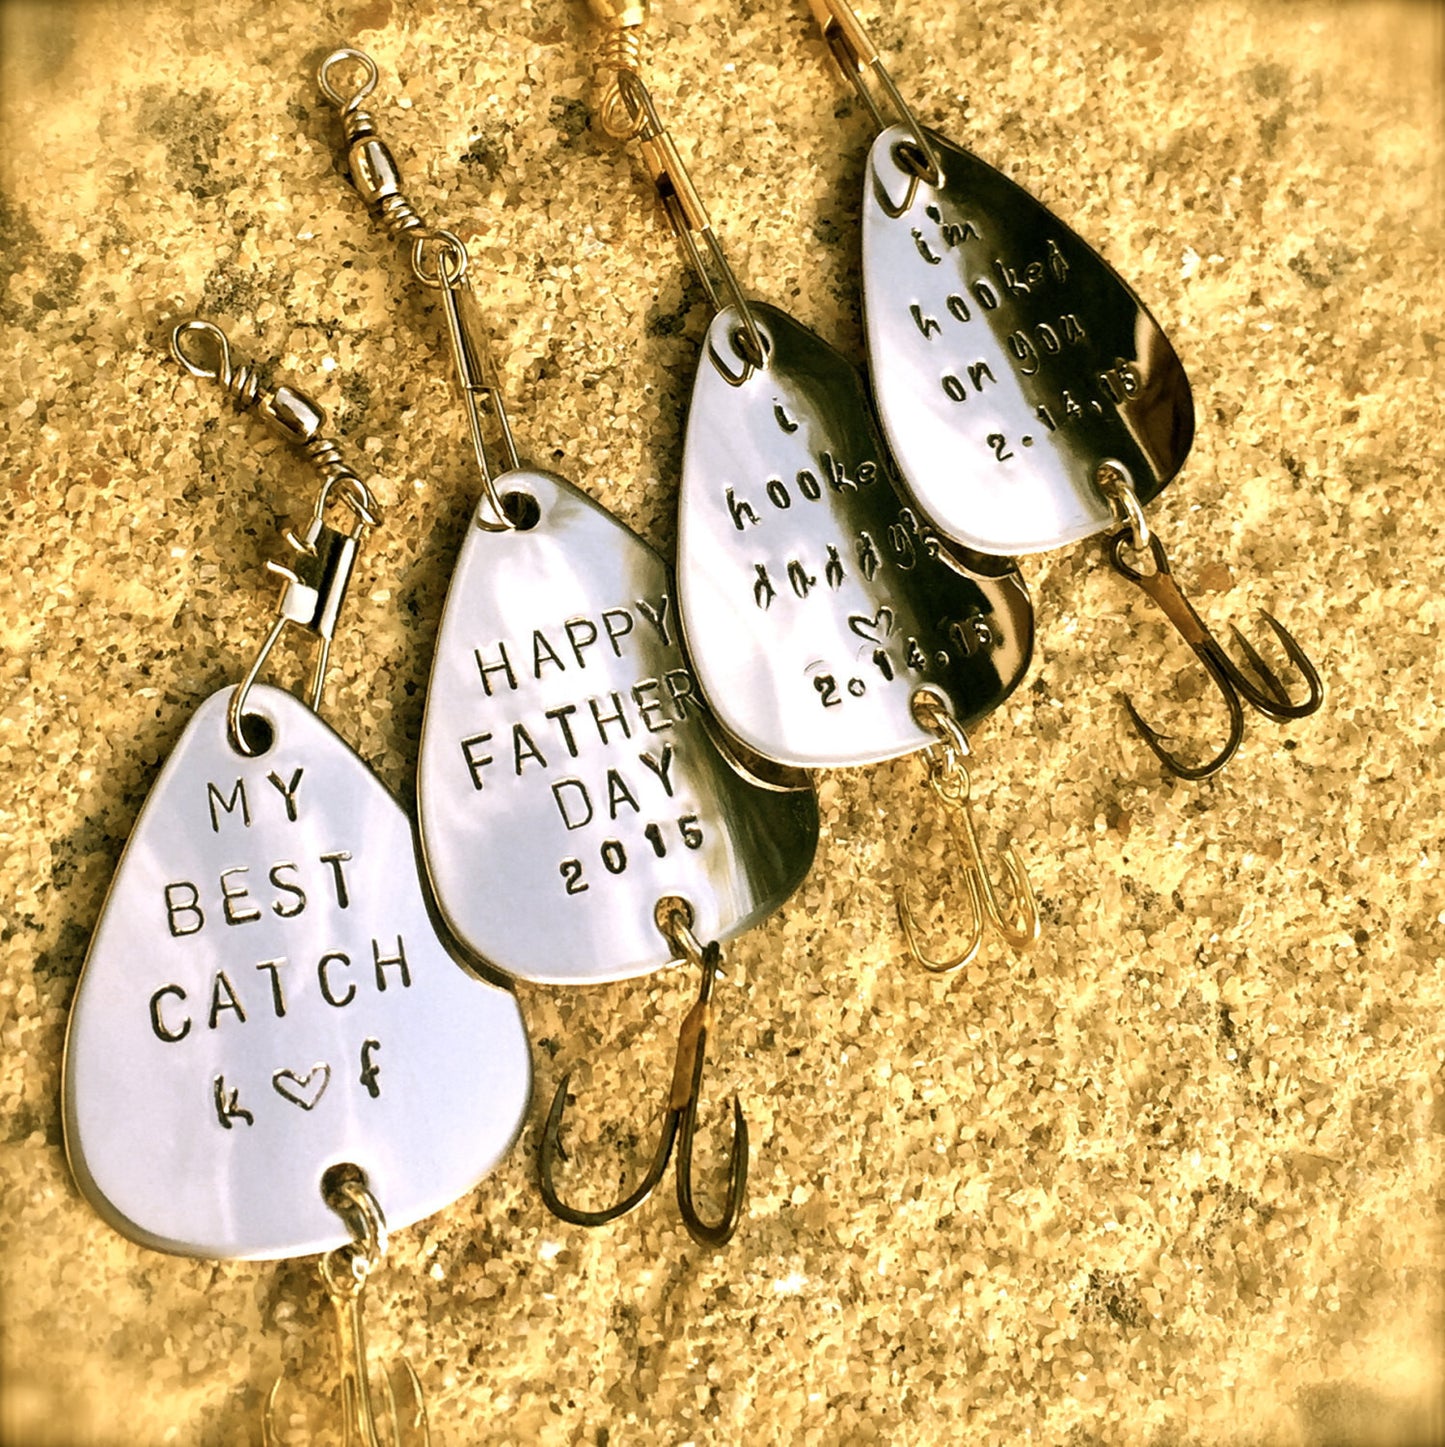 Personalized Fishing Lure, Hand Stamped Fishing Lure, Metal Fishing Lure, Father's Day Gift, Custom Fisherman Gift, natashaaloha - Natashaaloha, jewelry, bracelets, necklace, keychains, fishing lures, gifts for men, charms, personalized, 